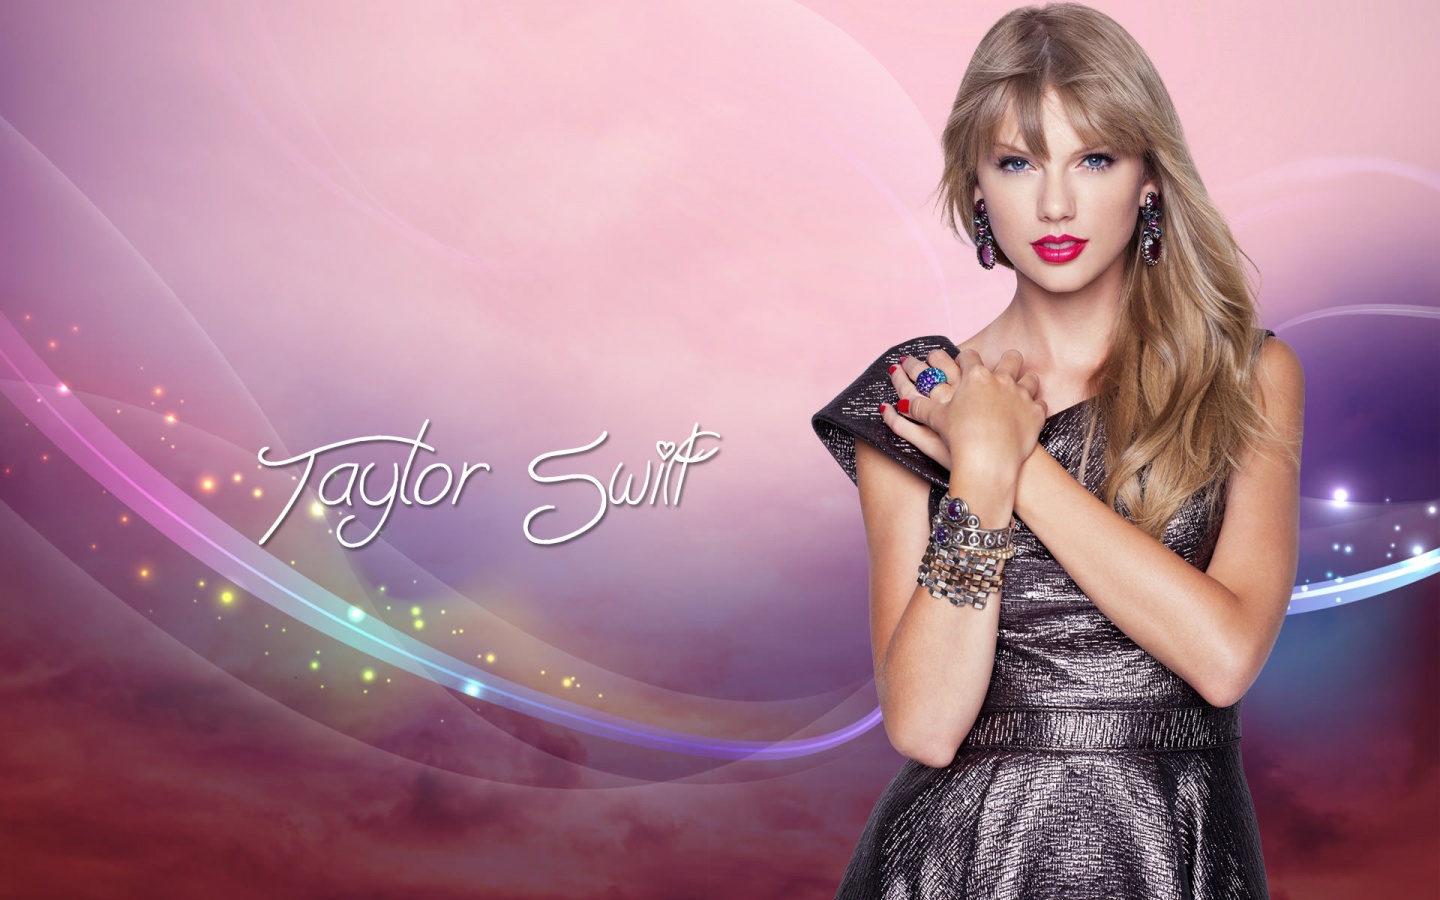 Free Download Taylor Swift Computer Wallpapers Desktop Backgrounds 1440x900 Id 1440x900 For Your Desktop Mobile Tablet Explore 48 Taylor Swift Wallpapers For Computer Best Taylor Swift Wallpapers Taylor Swift